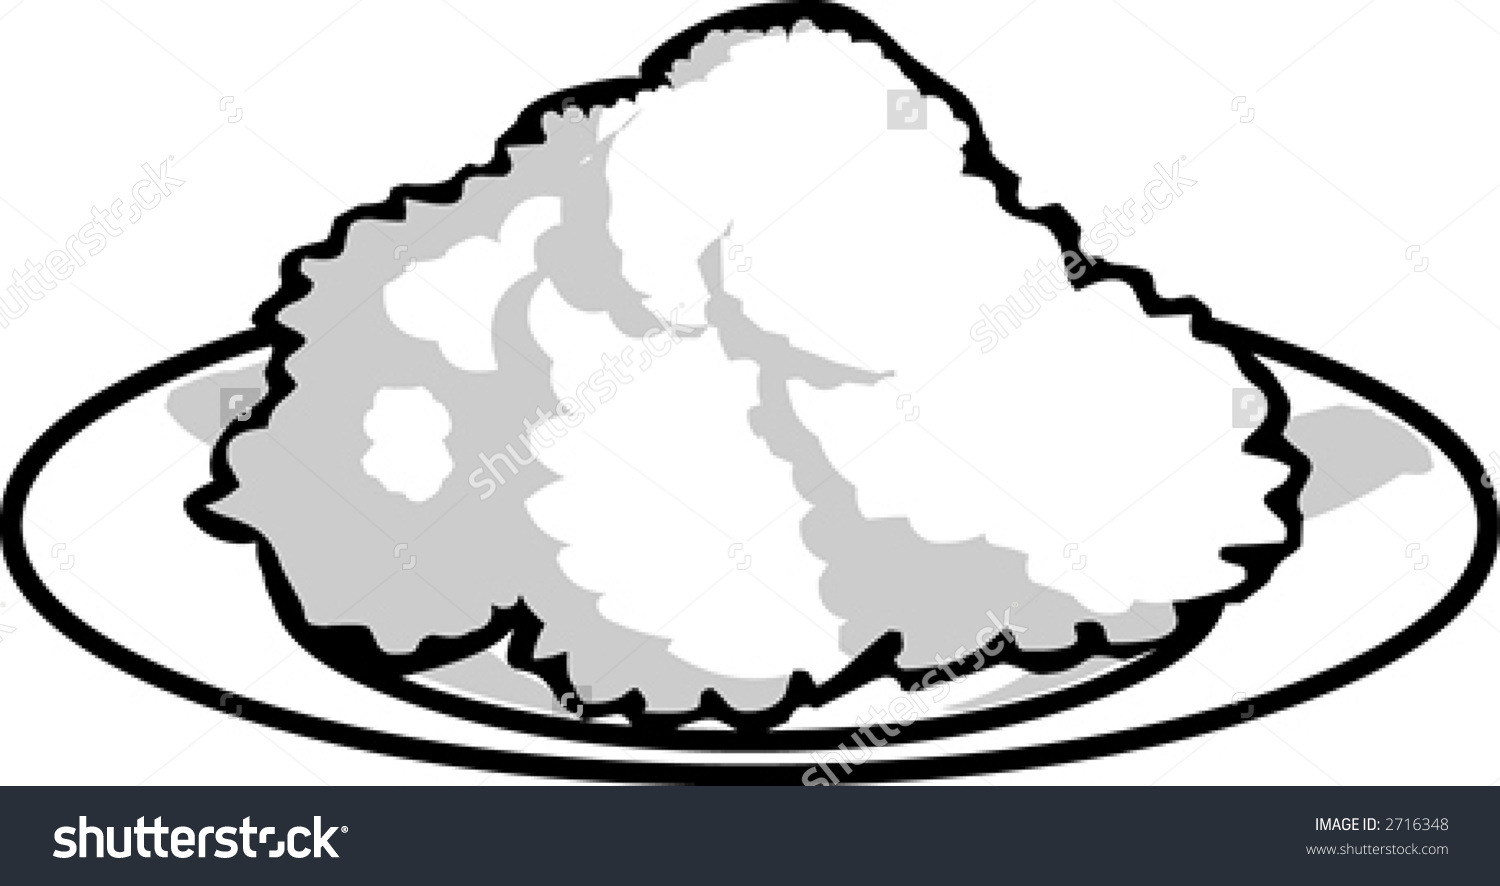 rice clipart black and white – Clipart Free Download